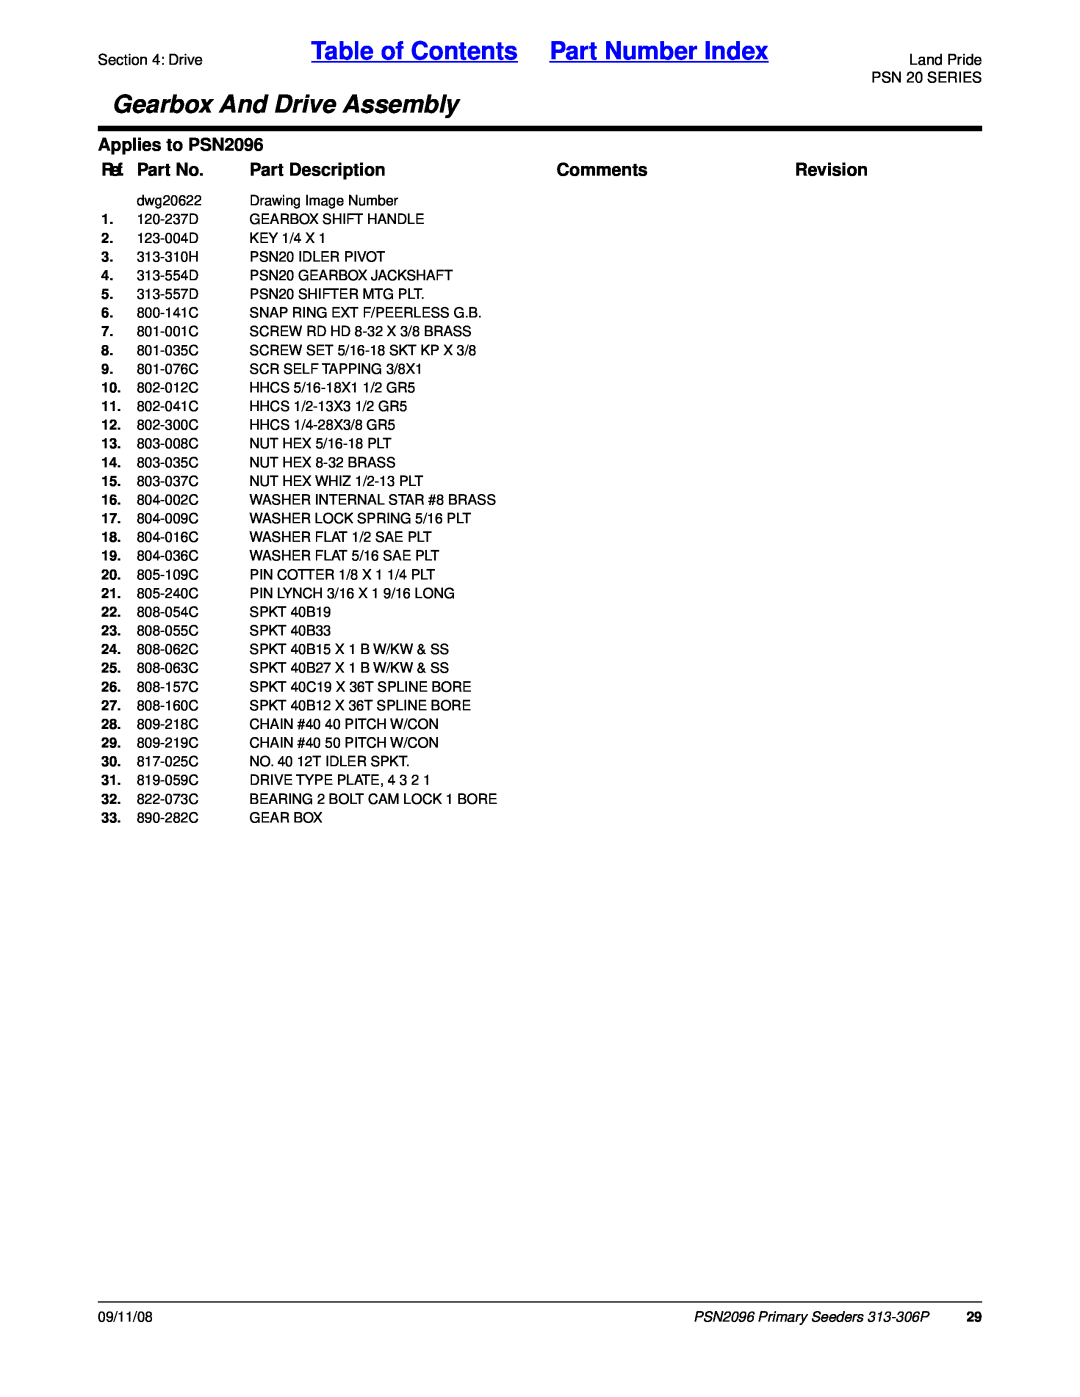 Land Pride 313-306P Table of Contents Part Number Index, Gearbox And Drive Assembly, Applies to PSN2096, Ref. Part No 